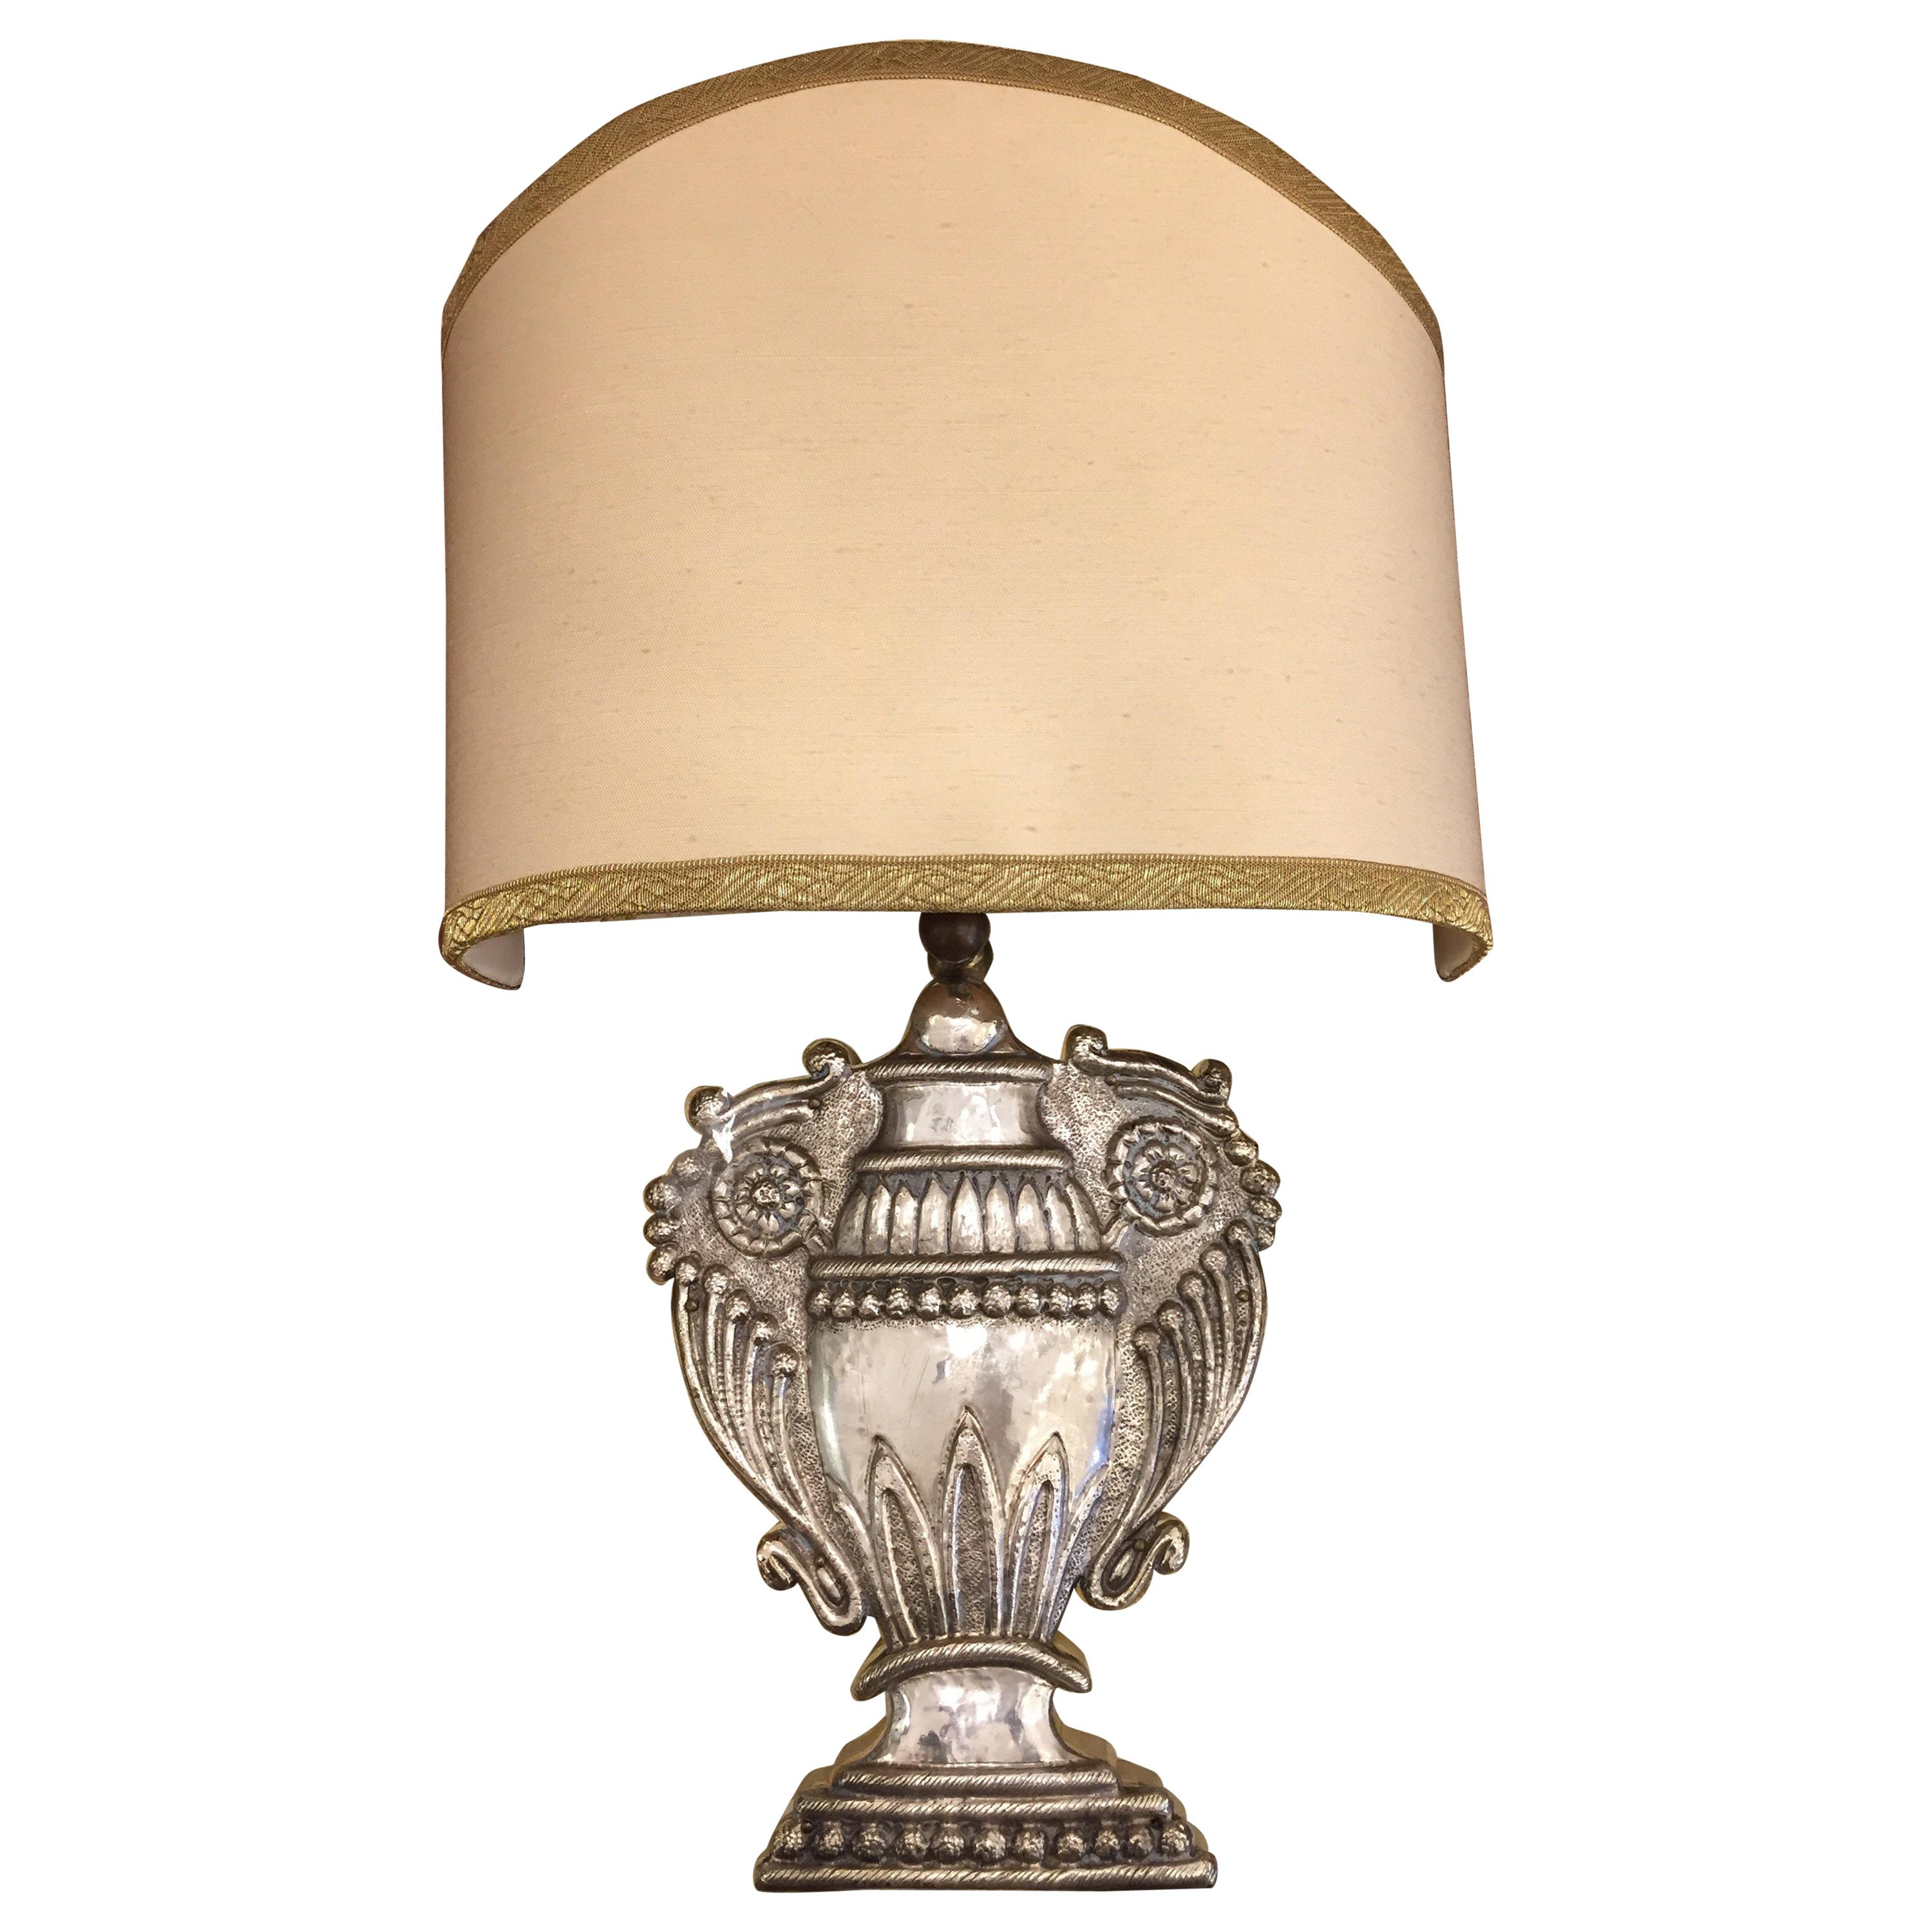 Italian Repoussé Silvered Sconce Urn Vase Wall-Light 20th Century Baroque Style For Sale